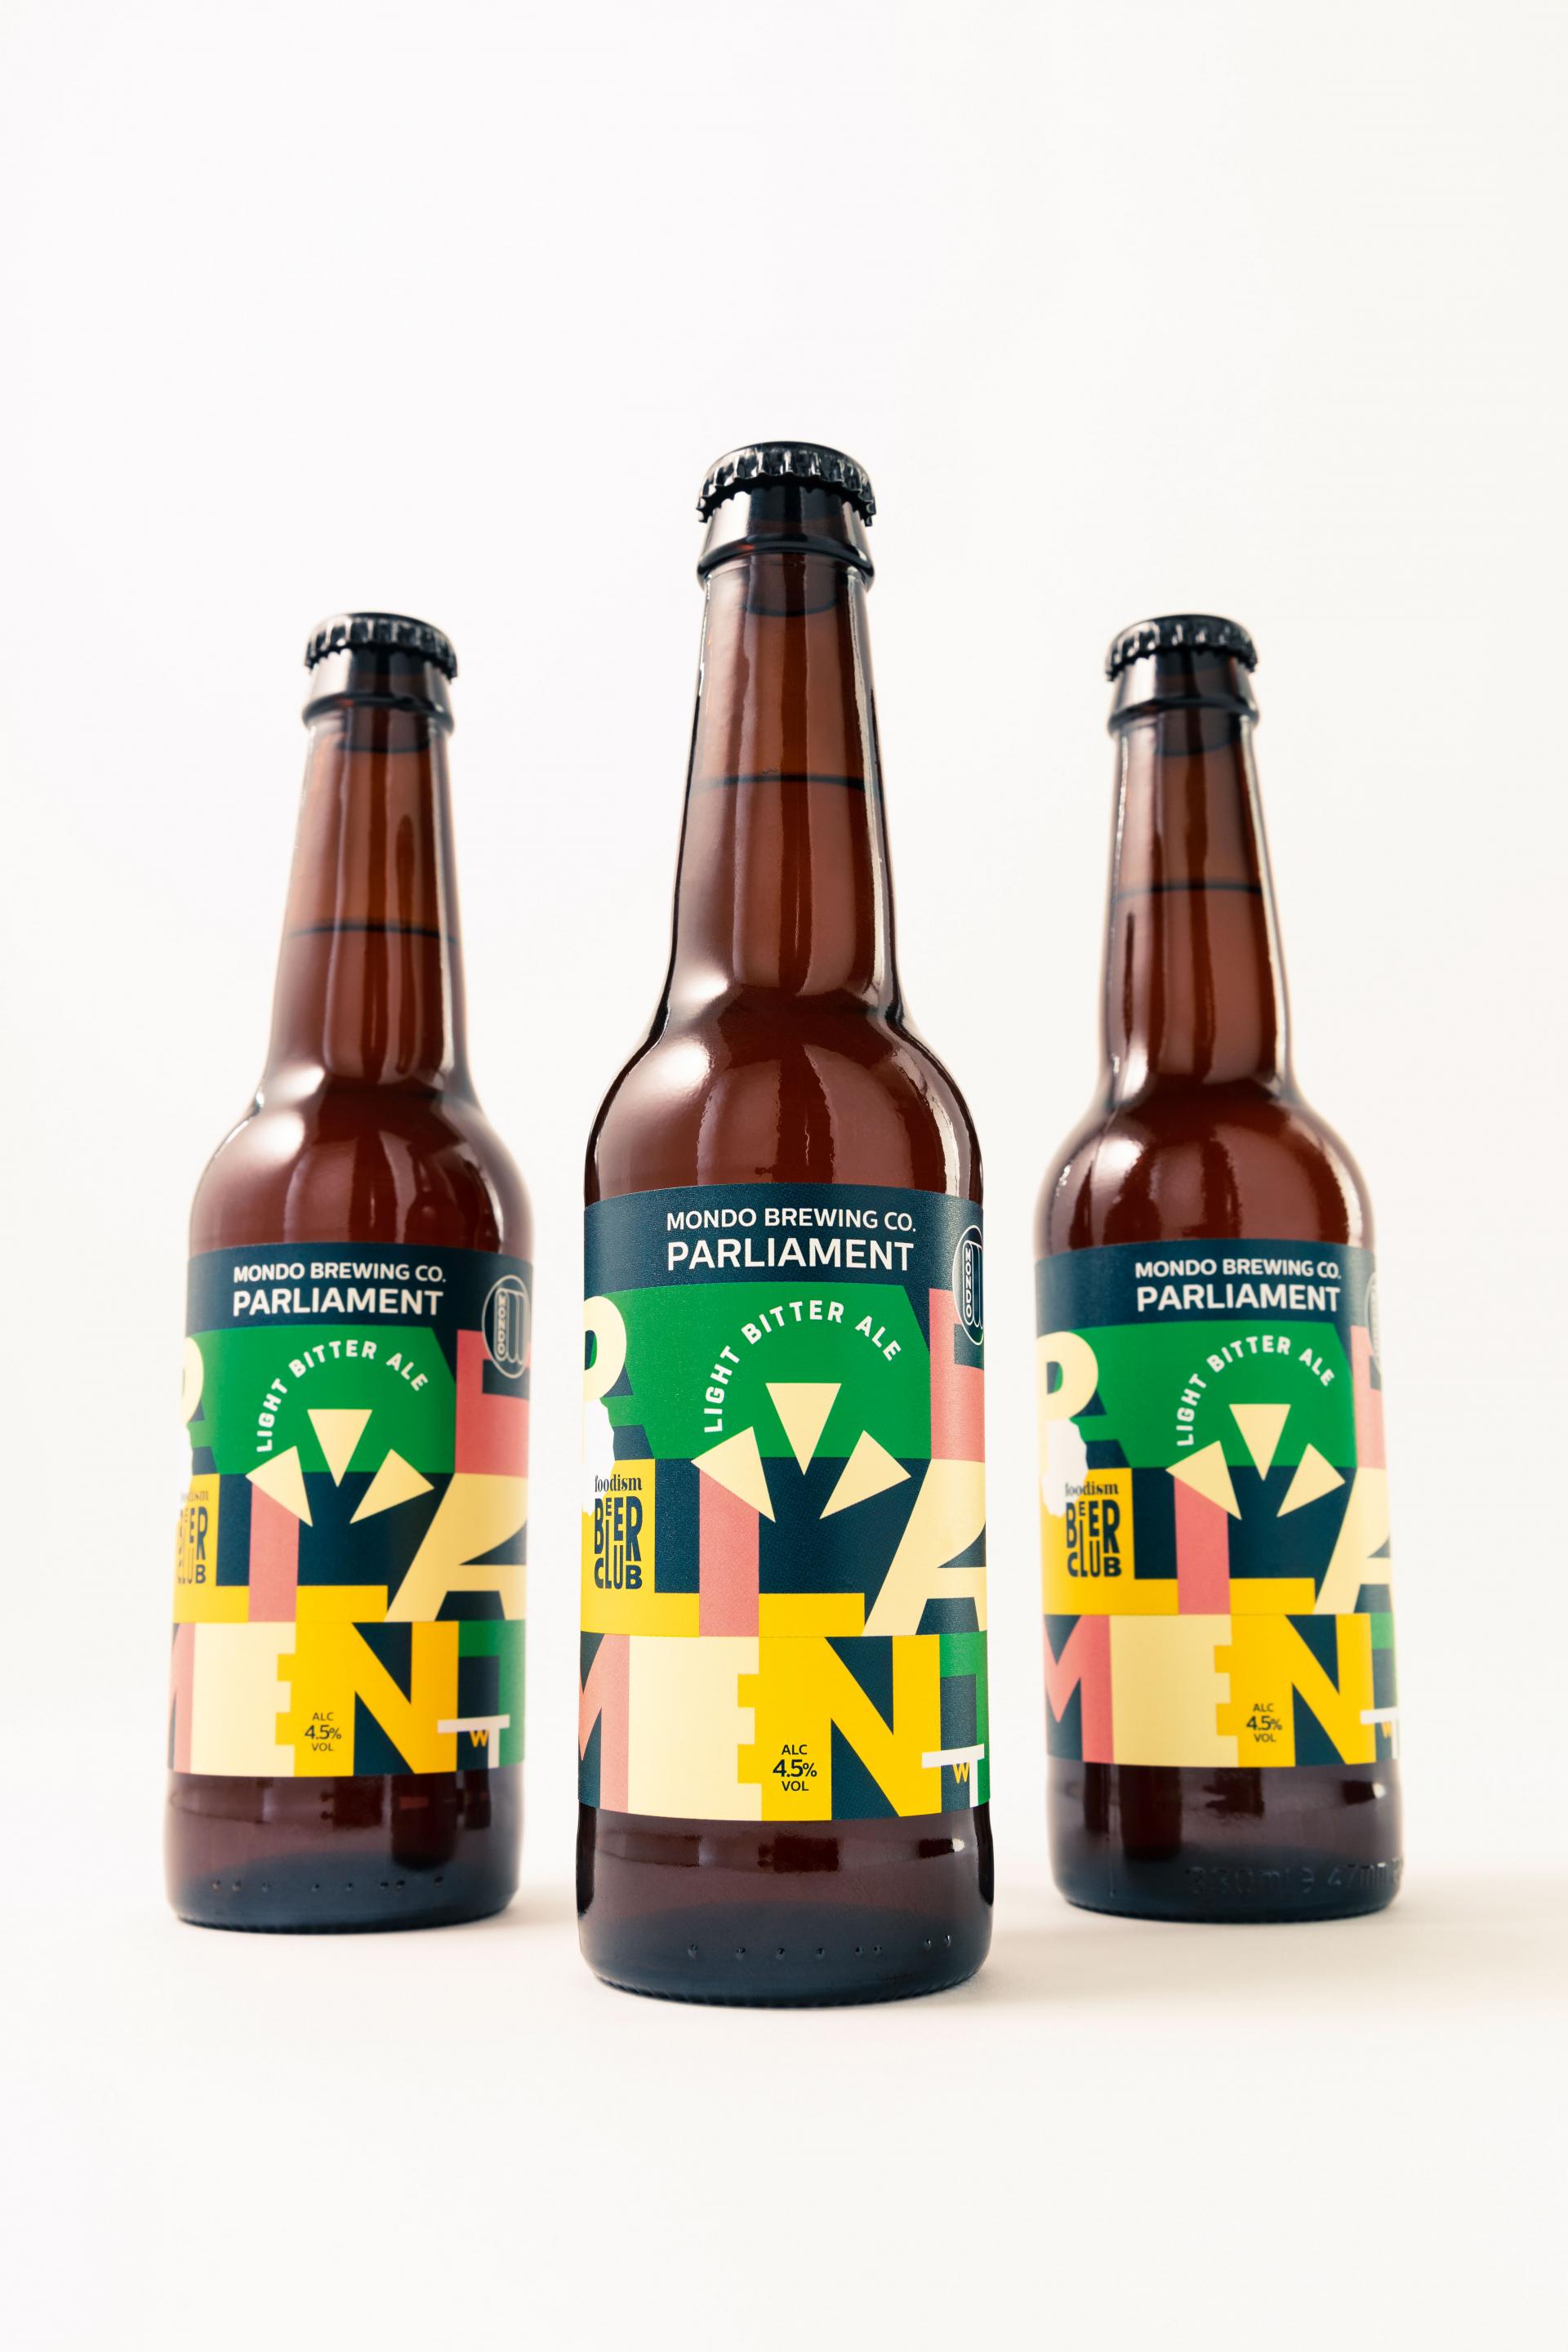 Bottles of Foodism and Mondo Brewing Company's Parliament Light Bitter Ale